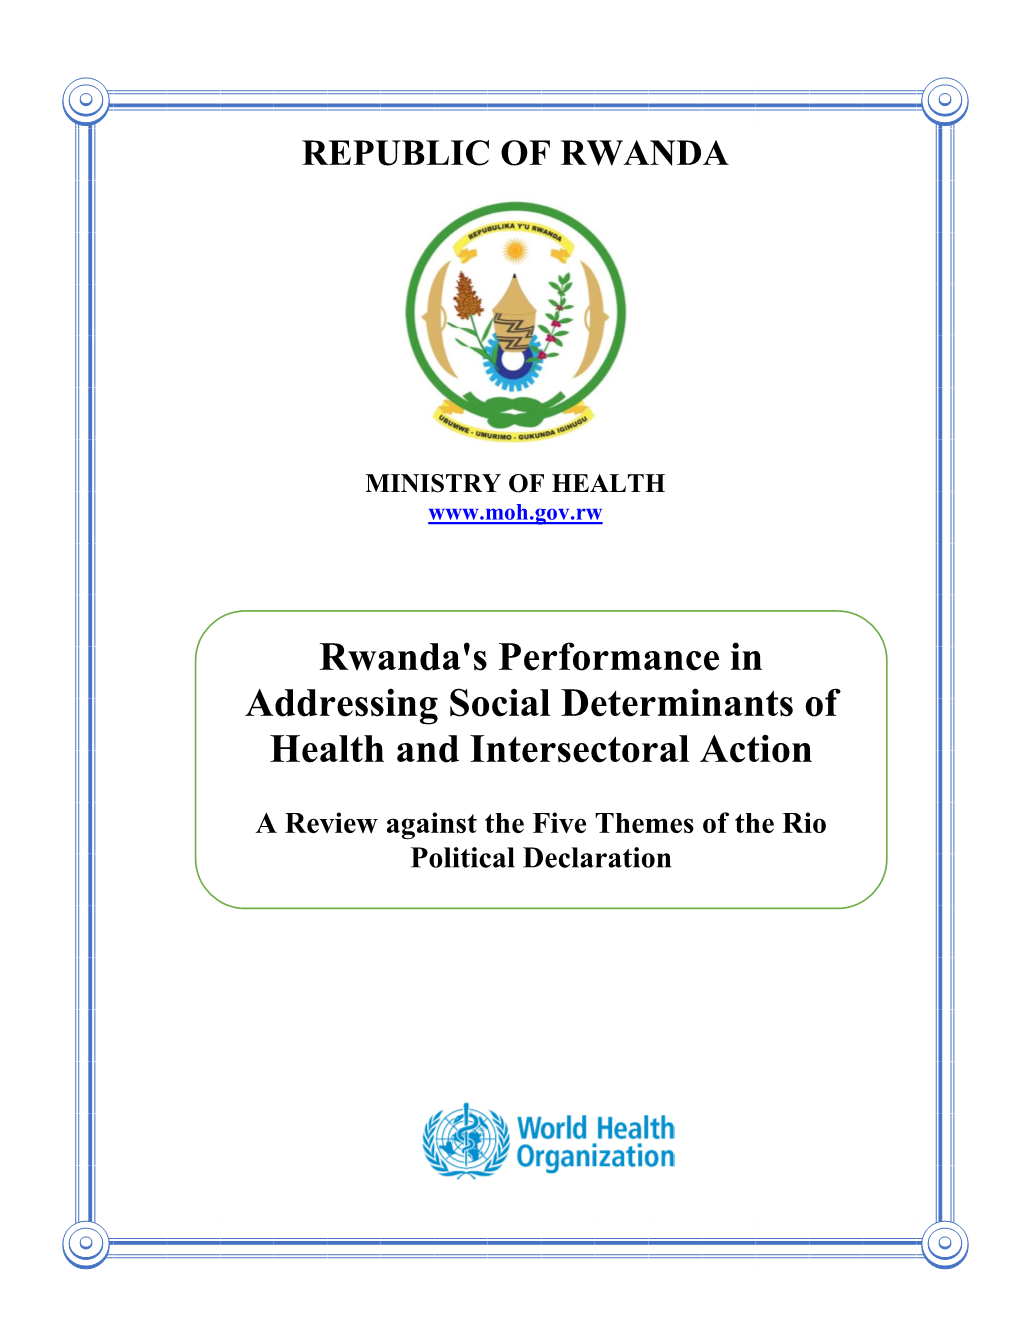 Rwanda's Performance in Addressing Social Determinants of Health and Intersectoral Action